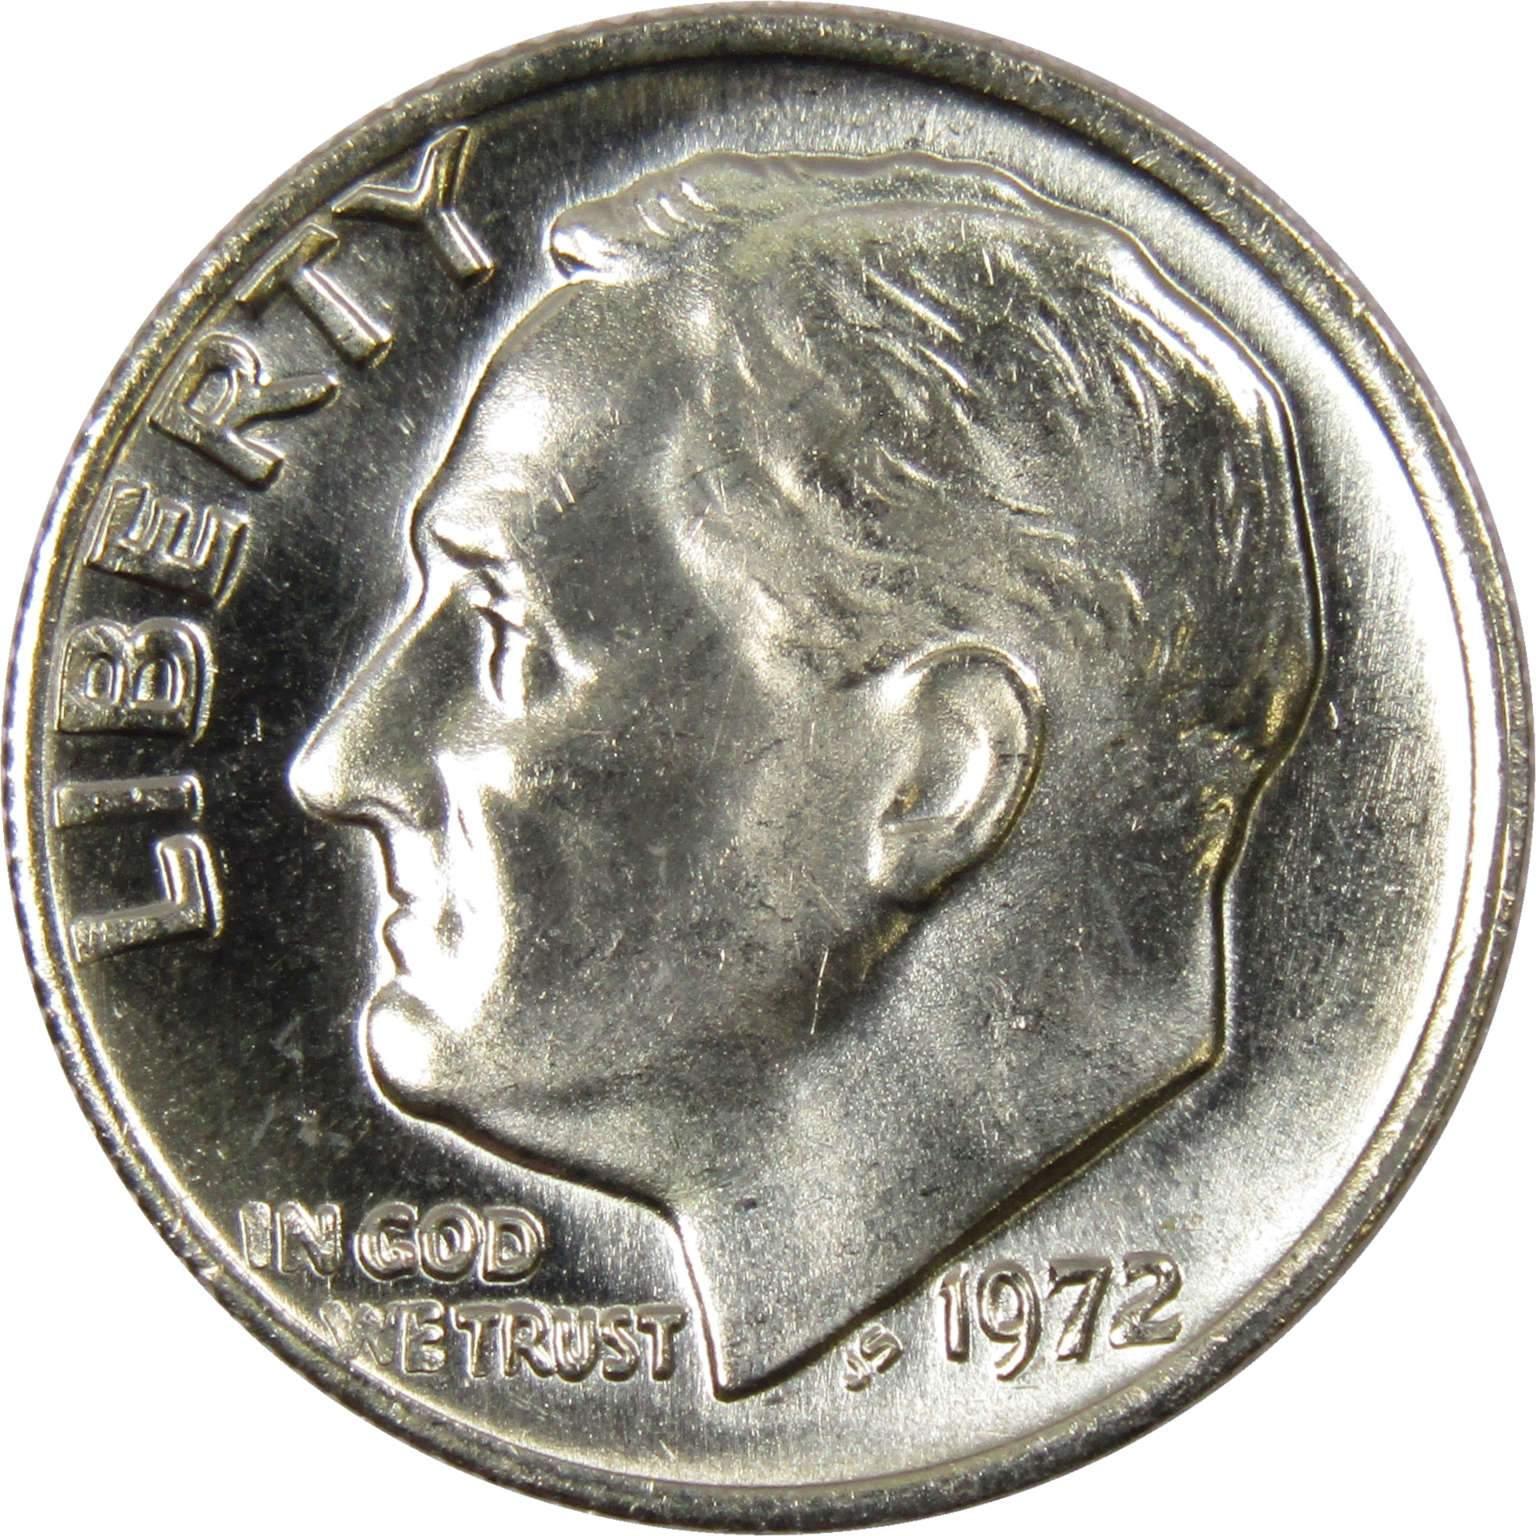 1972 Roosevelt Dime BU Uncirculated Mint State 10c US Coin Collectible